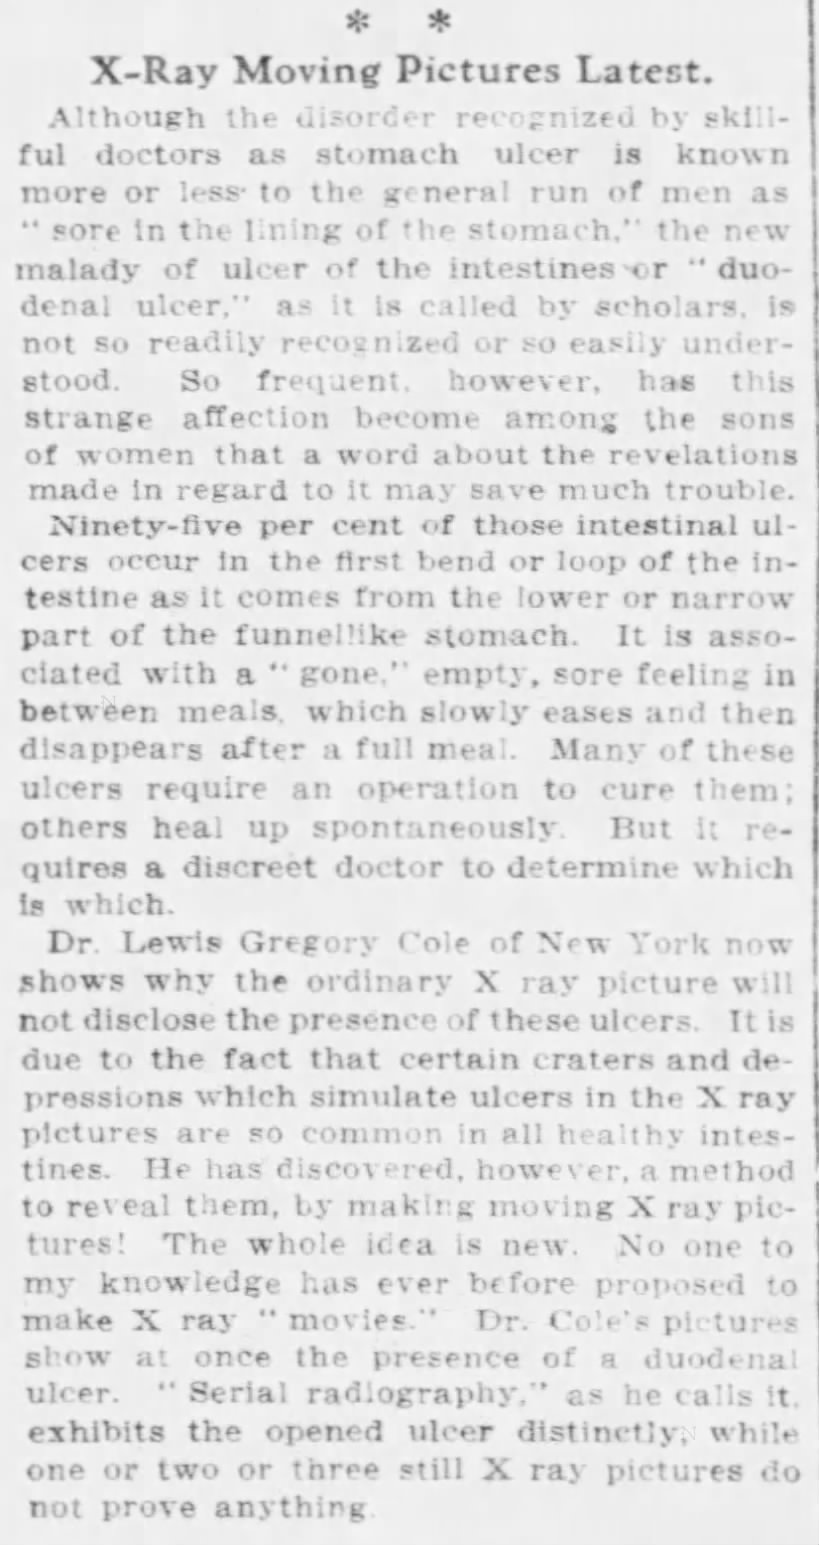 X-ray moving pictures latest (1913)